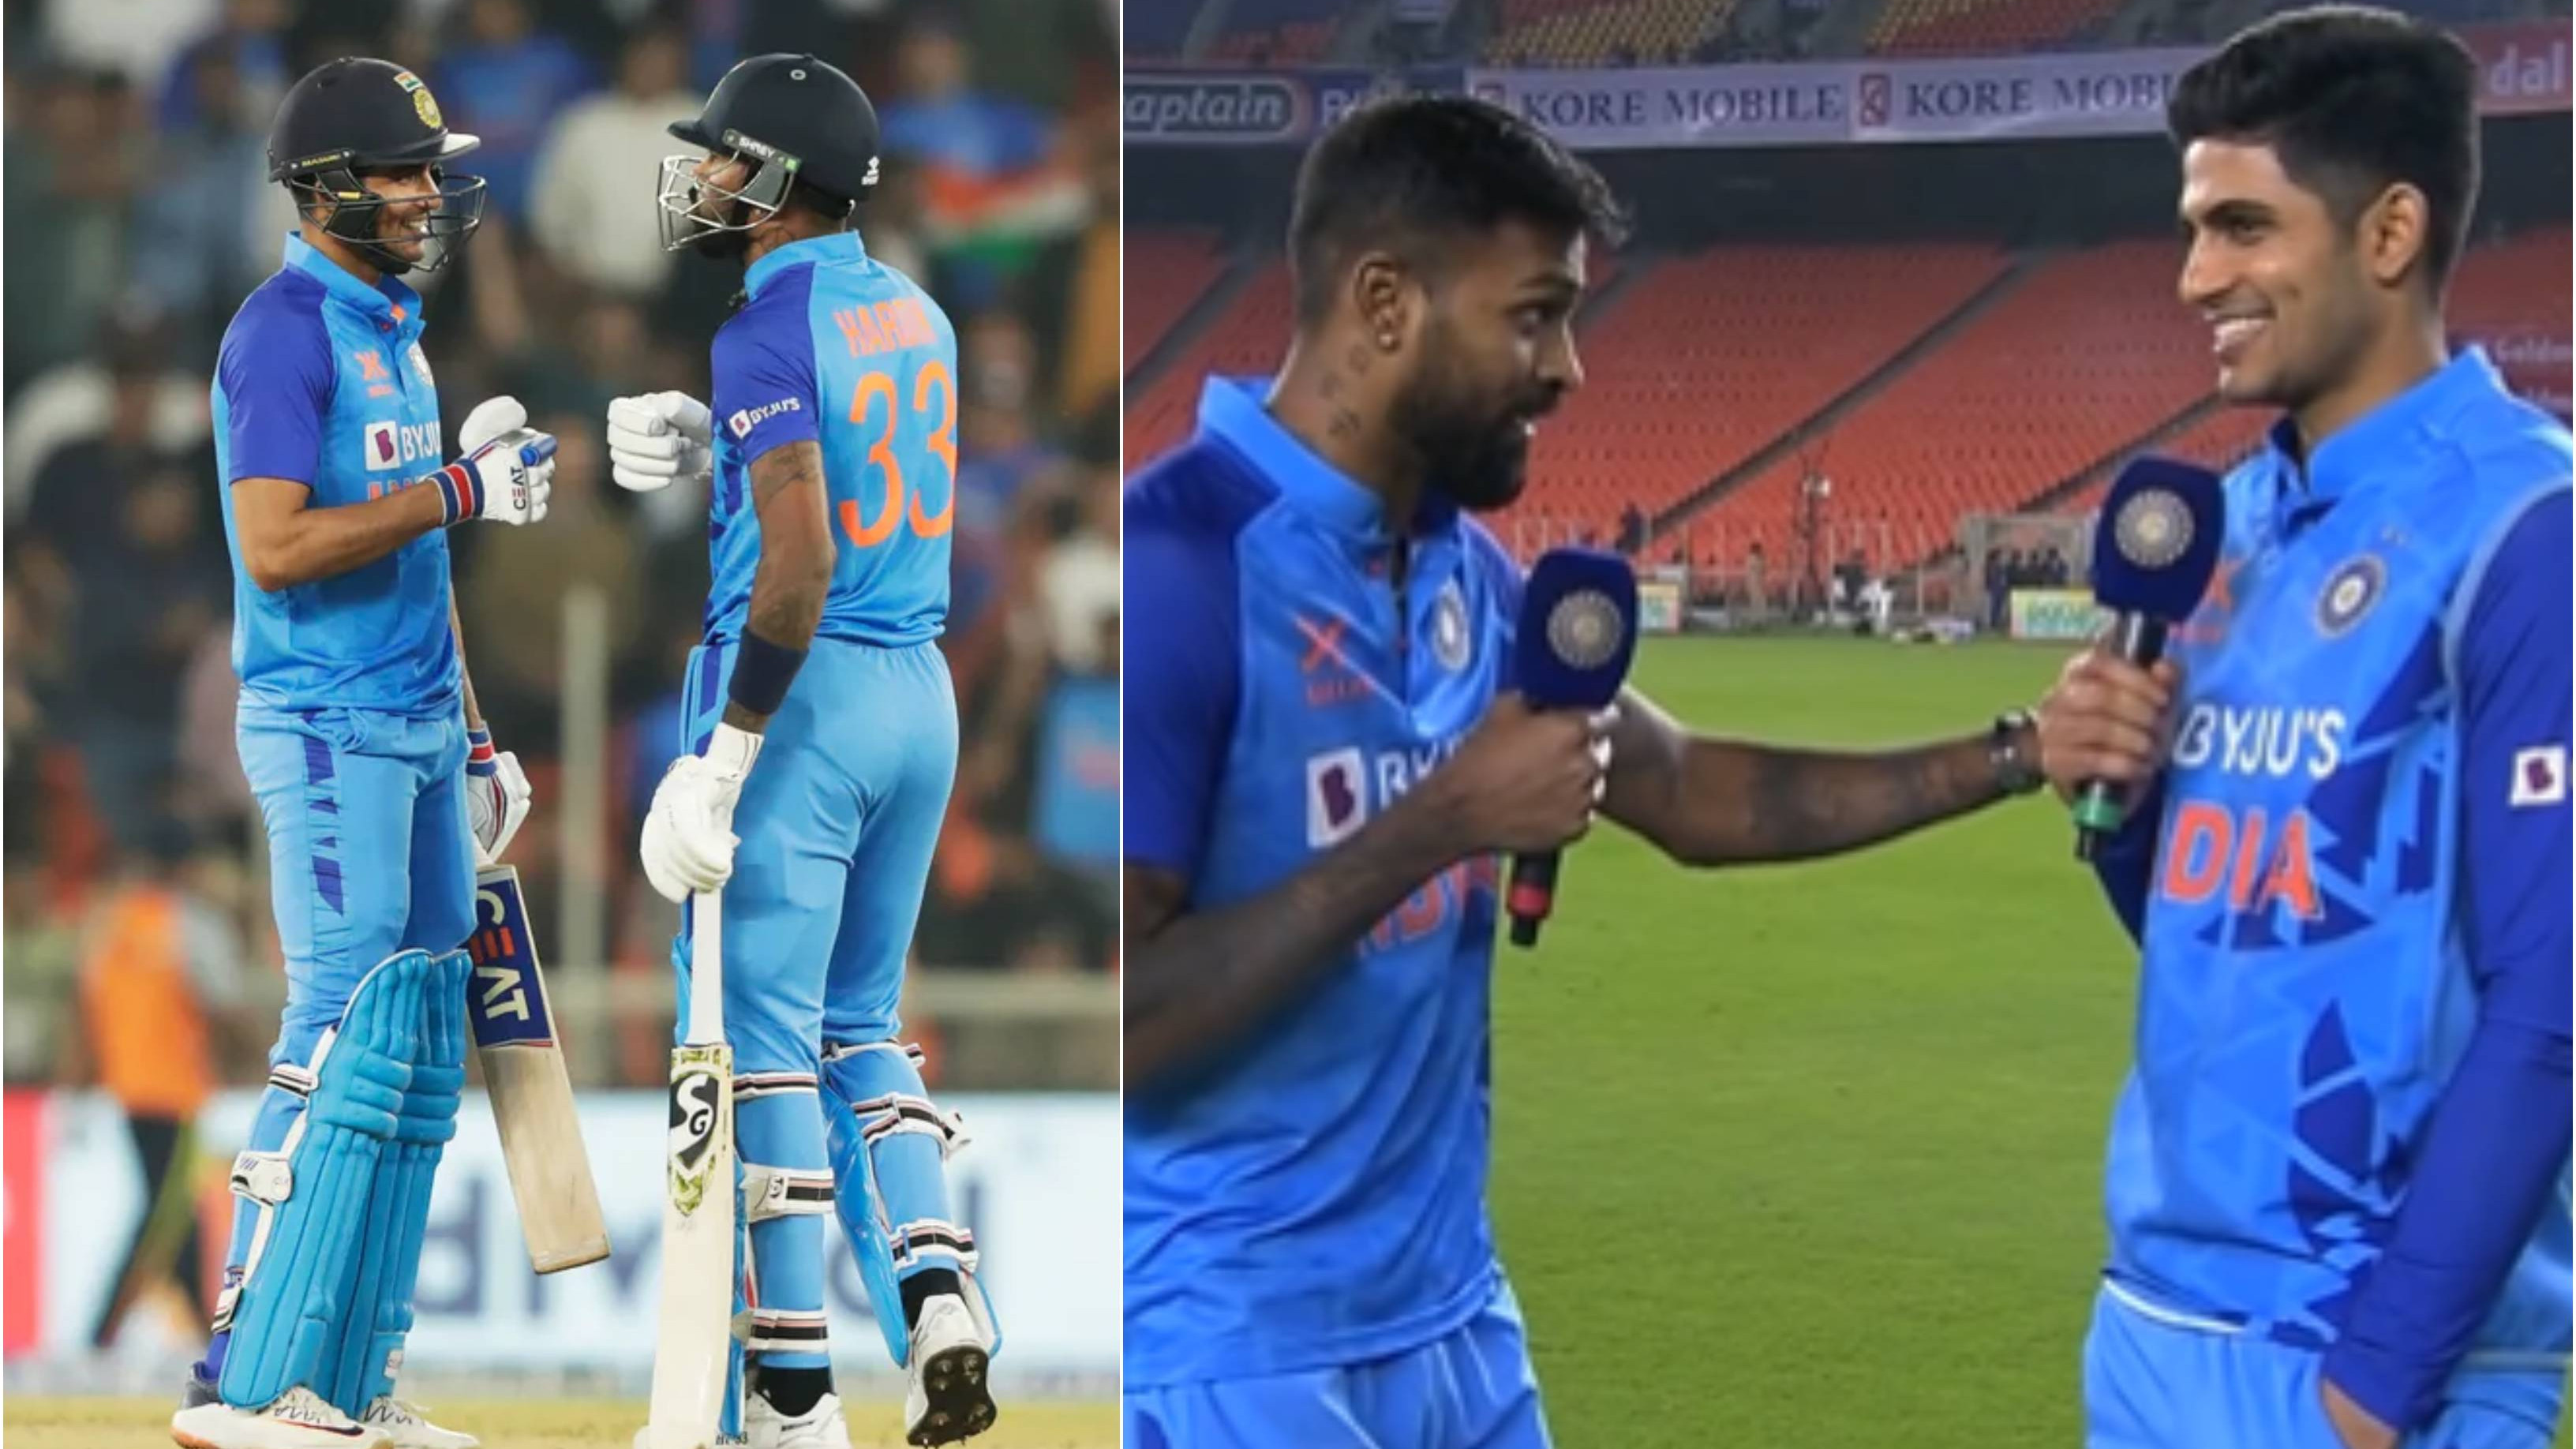 IND v NZ 2023: WATCH – “You gave me confidence before the match,” Shubman Gill thankful to captain Pandya’s support